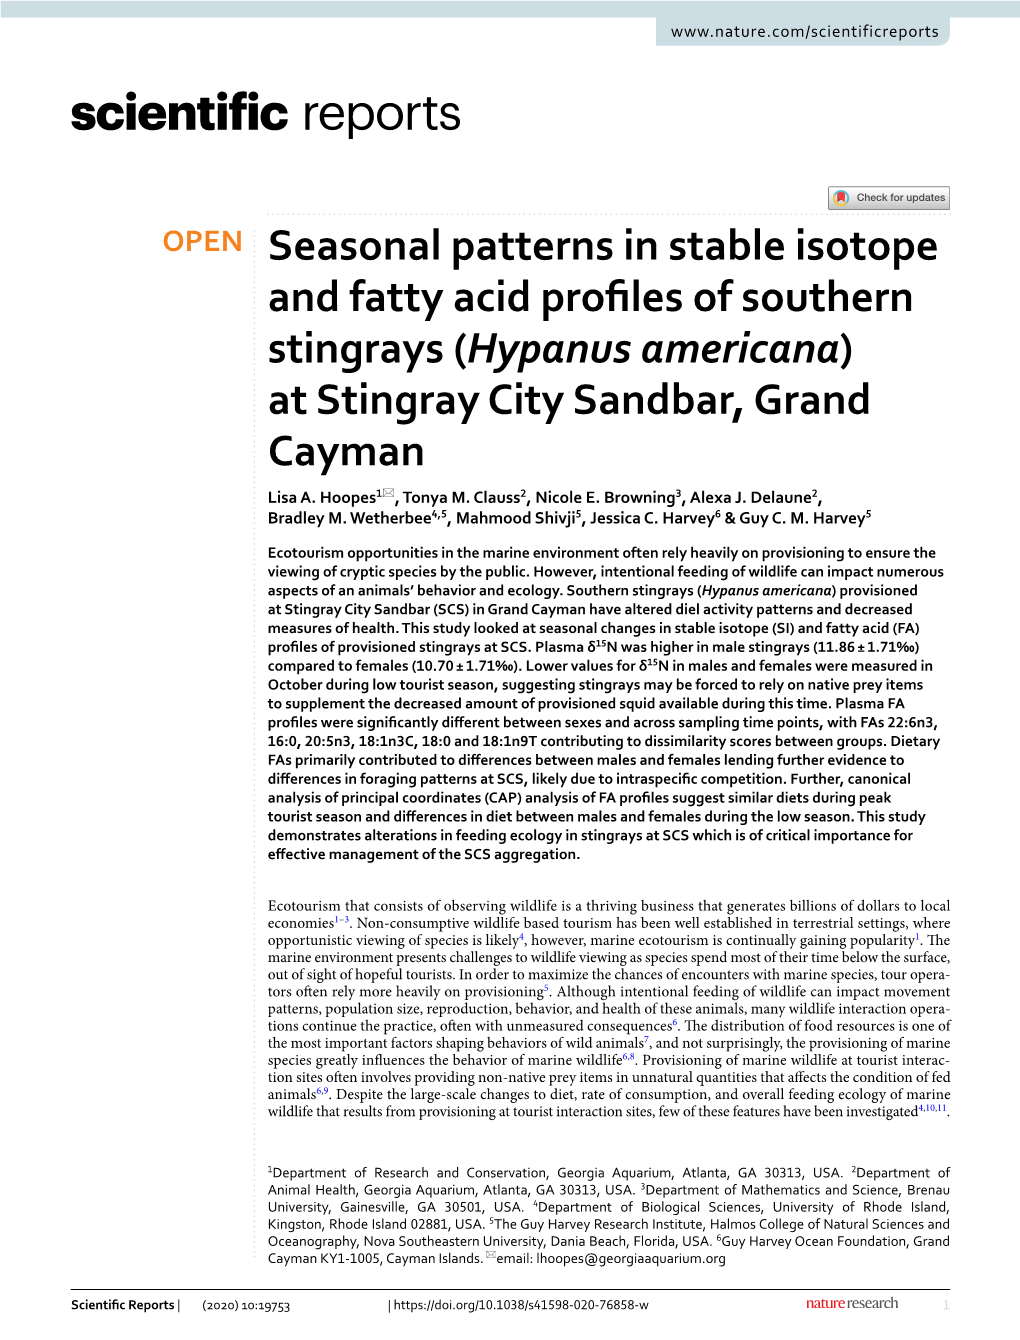 Seasonal Patterns in Stable Isotope and Fatty Acid Profiles Of